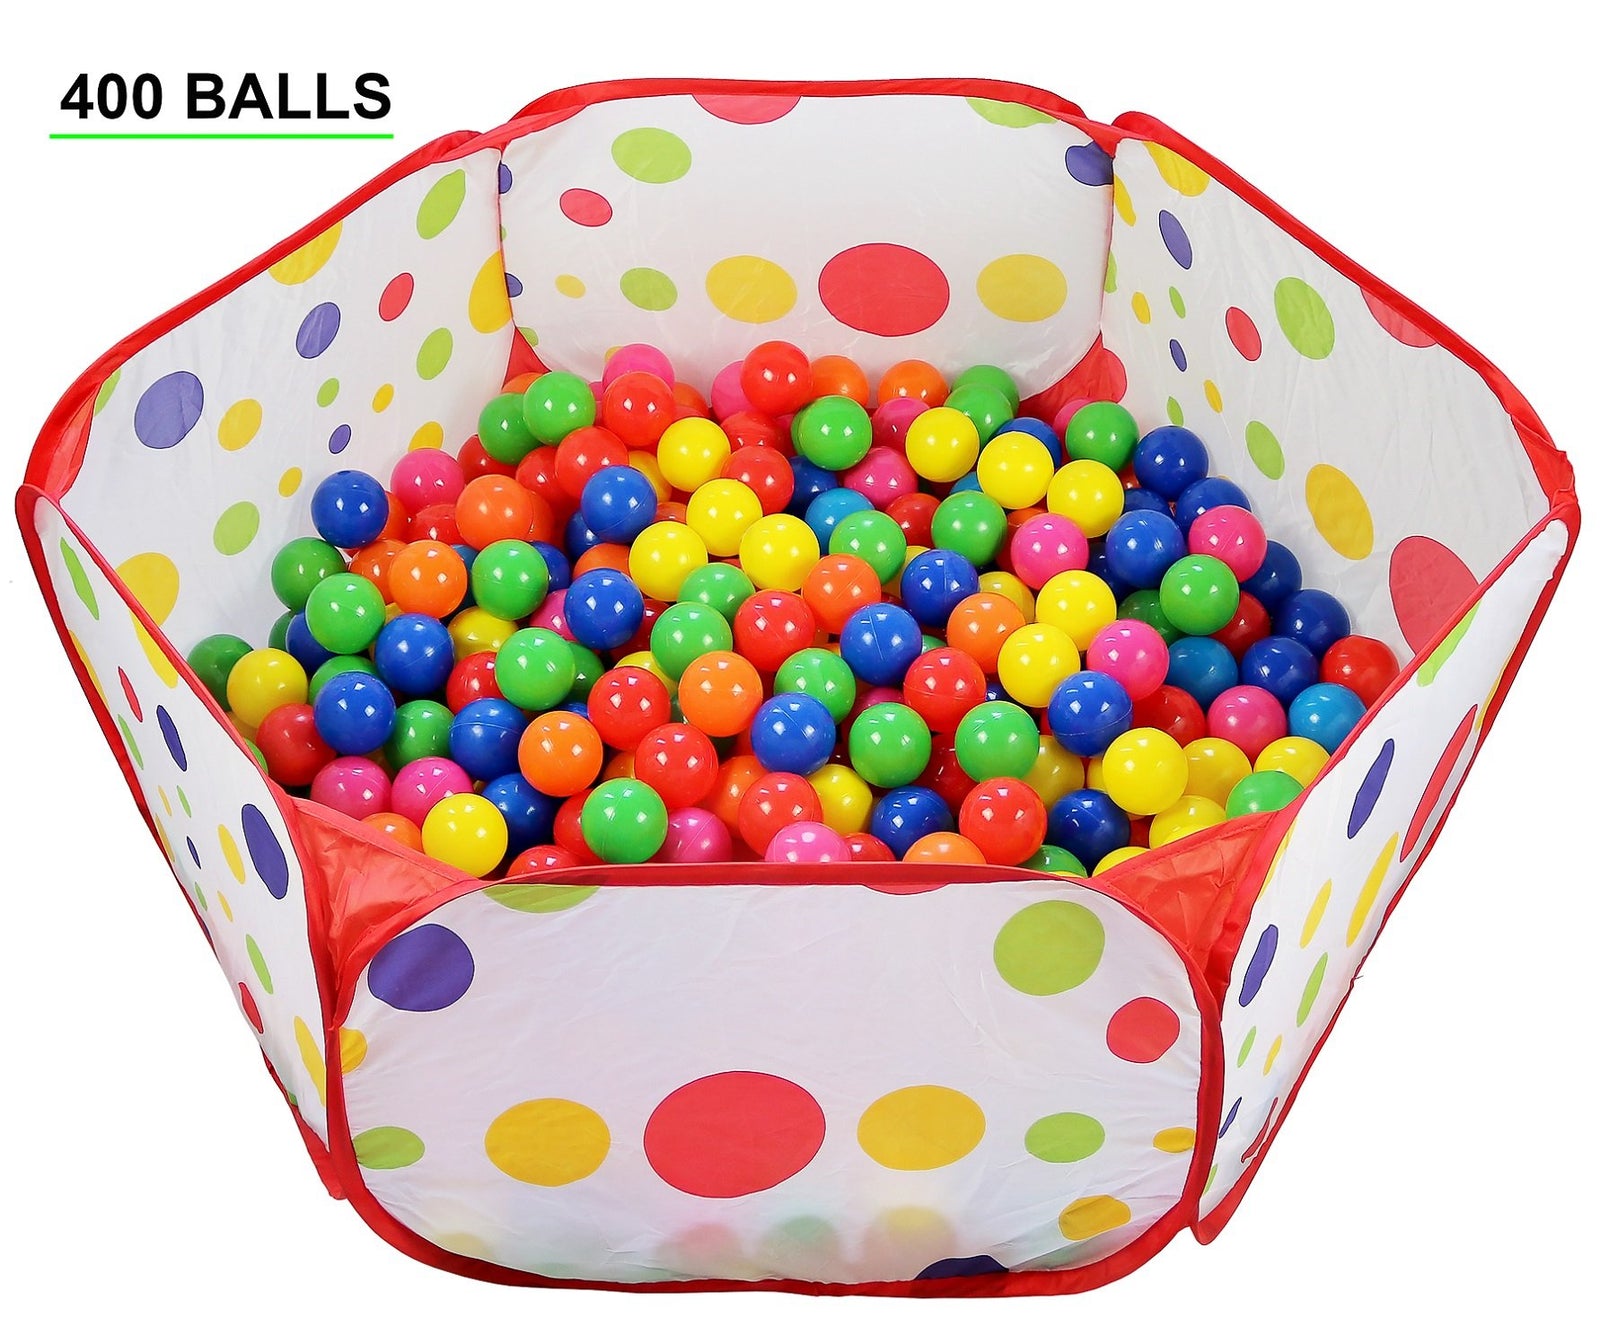 Plastic Ball Pit Balls, Click N' Play 400 Pack, Phthalate and BPA Free, Includes a Reusable Storage Bag with Zipper, Great Gift for Toddlers and Kids